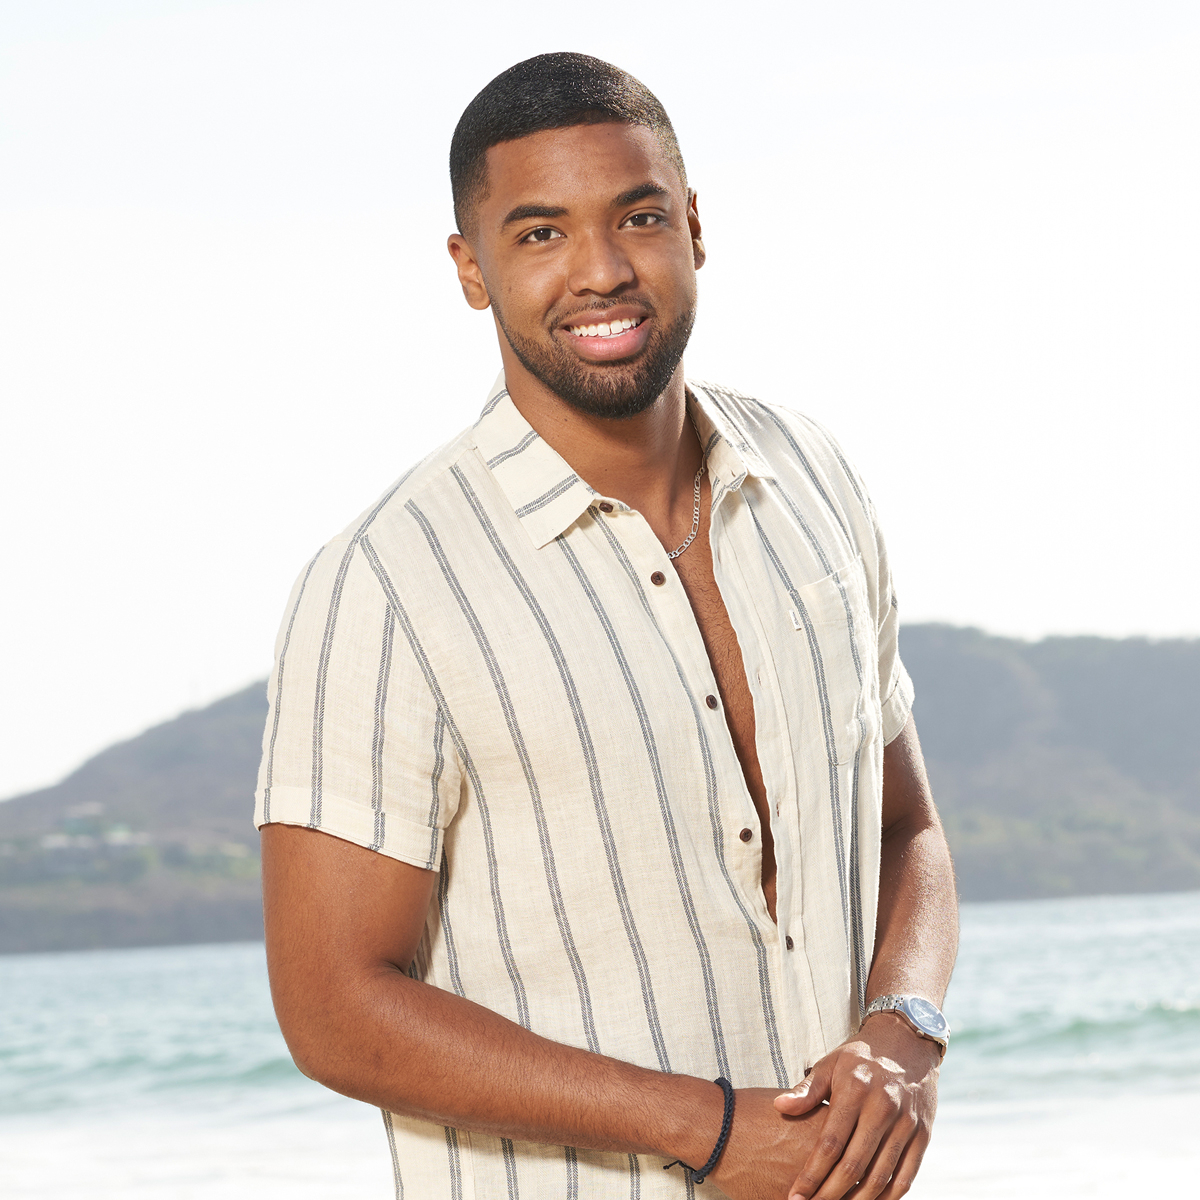 Bachelor in Paradise' star Chris Conran apologizes after exit